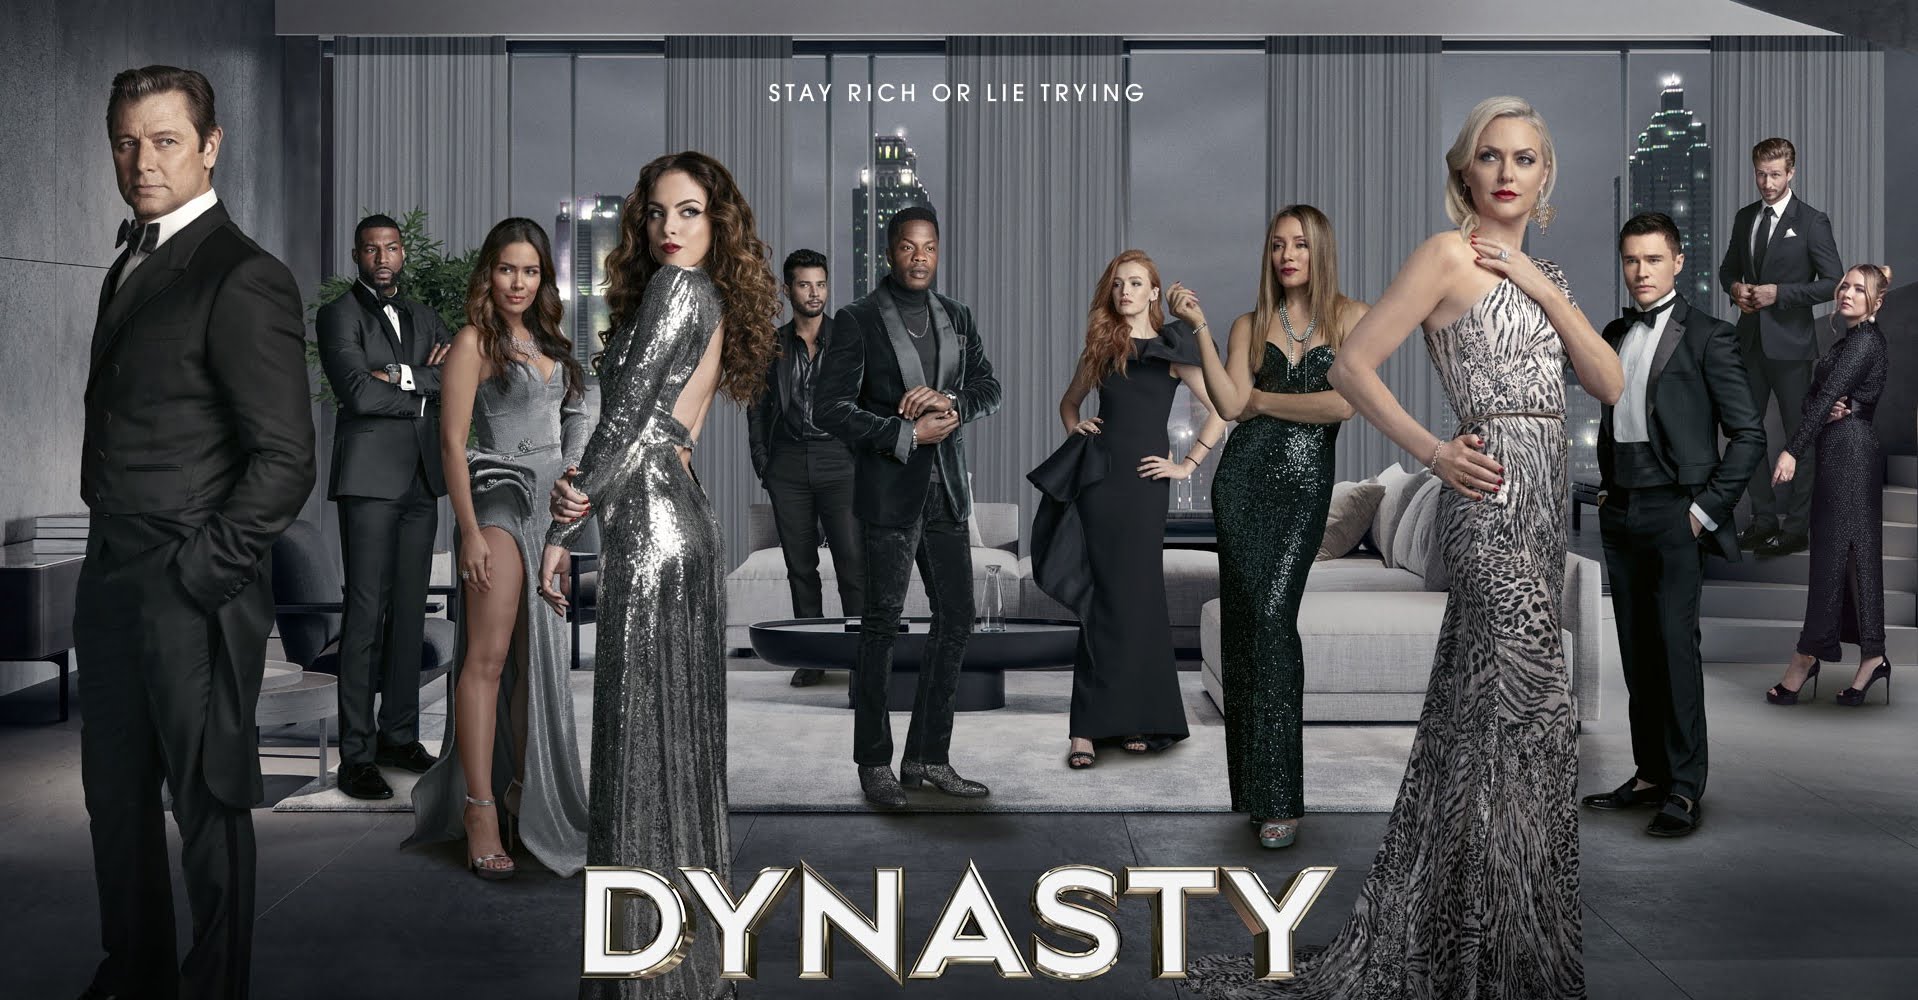 Dynasty Season 6: Why was the show Canceled after 5 seasons?